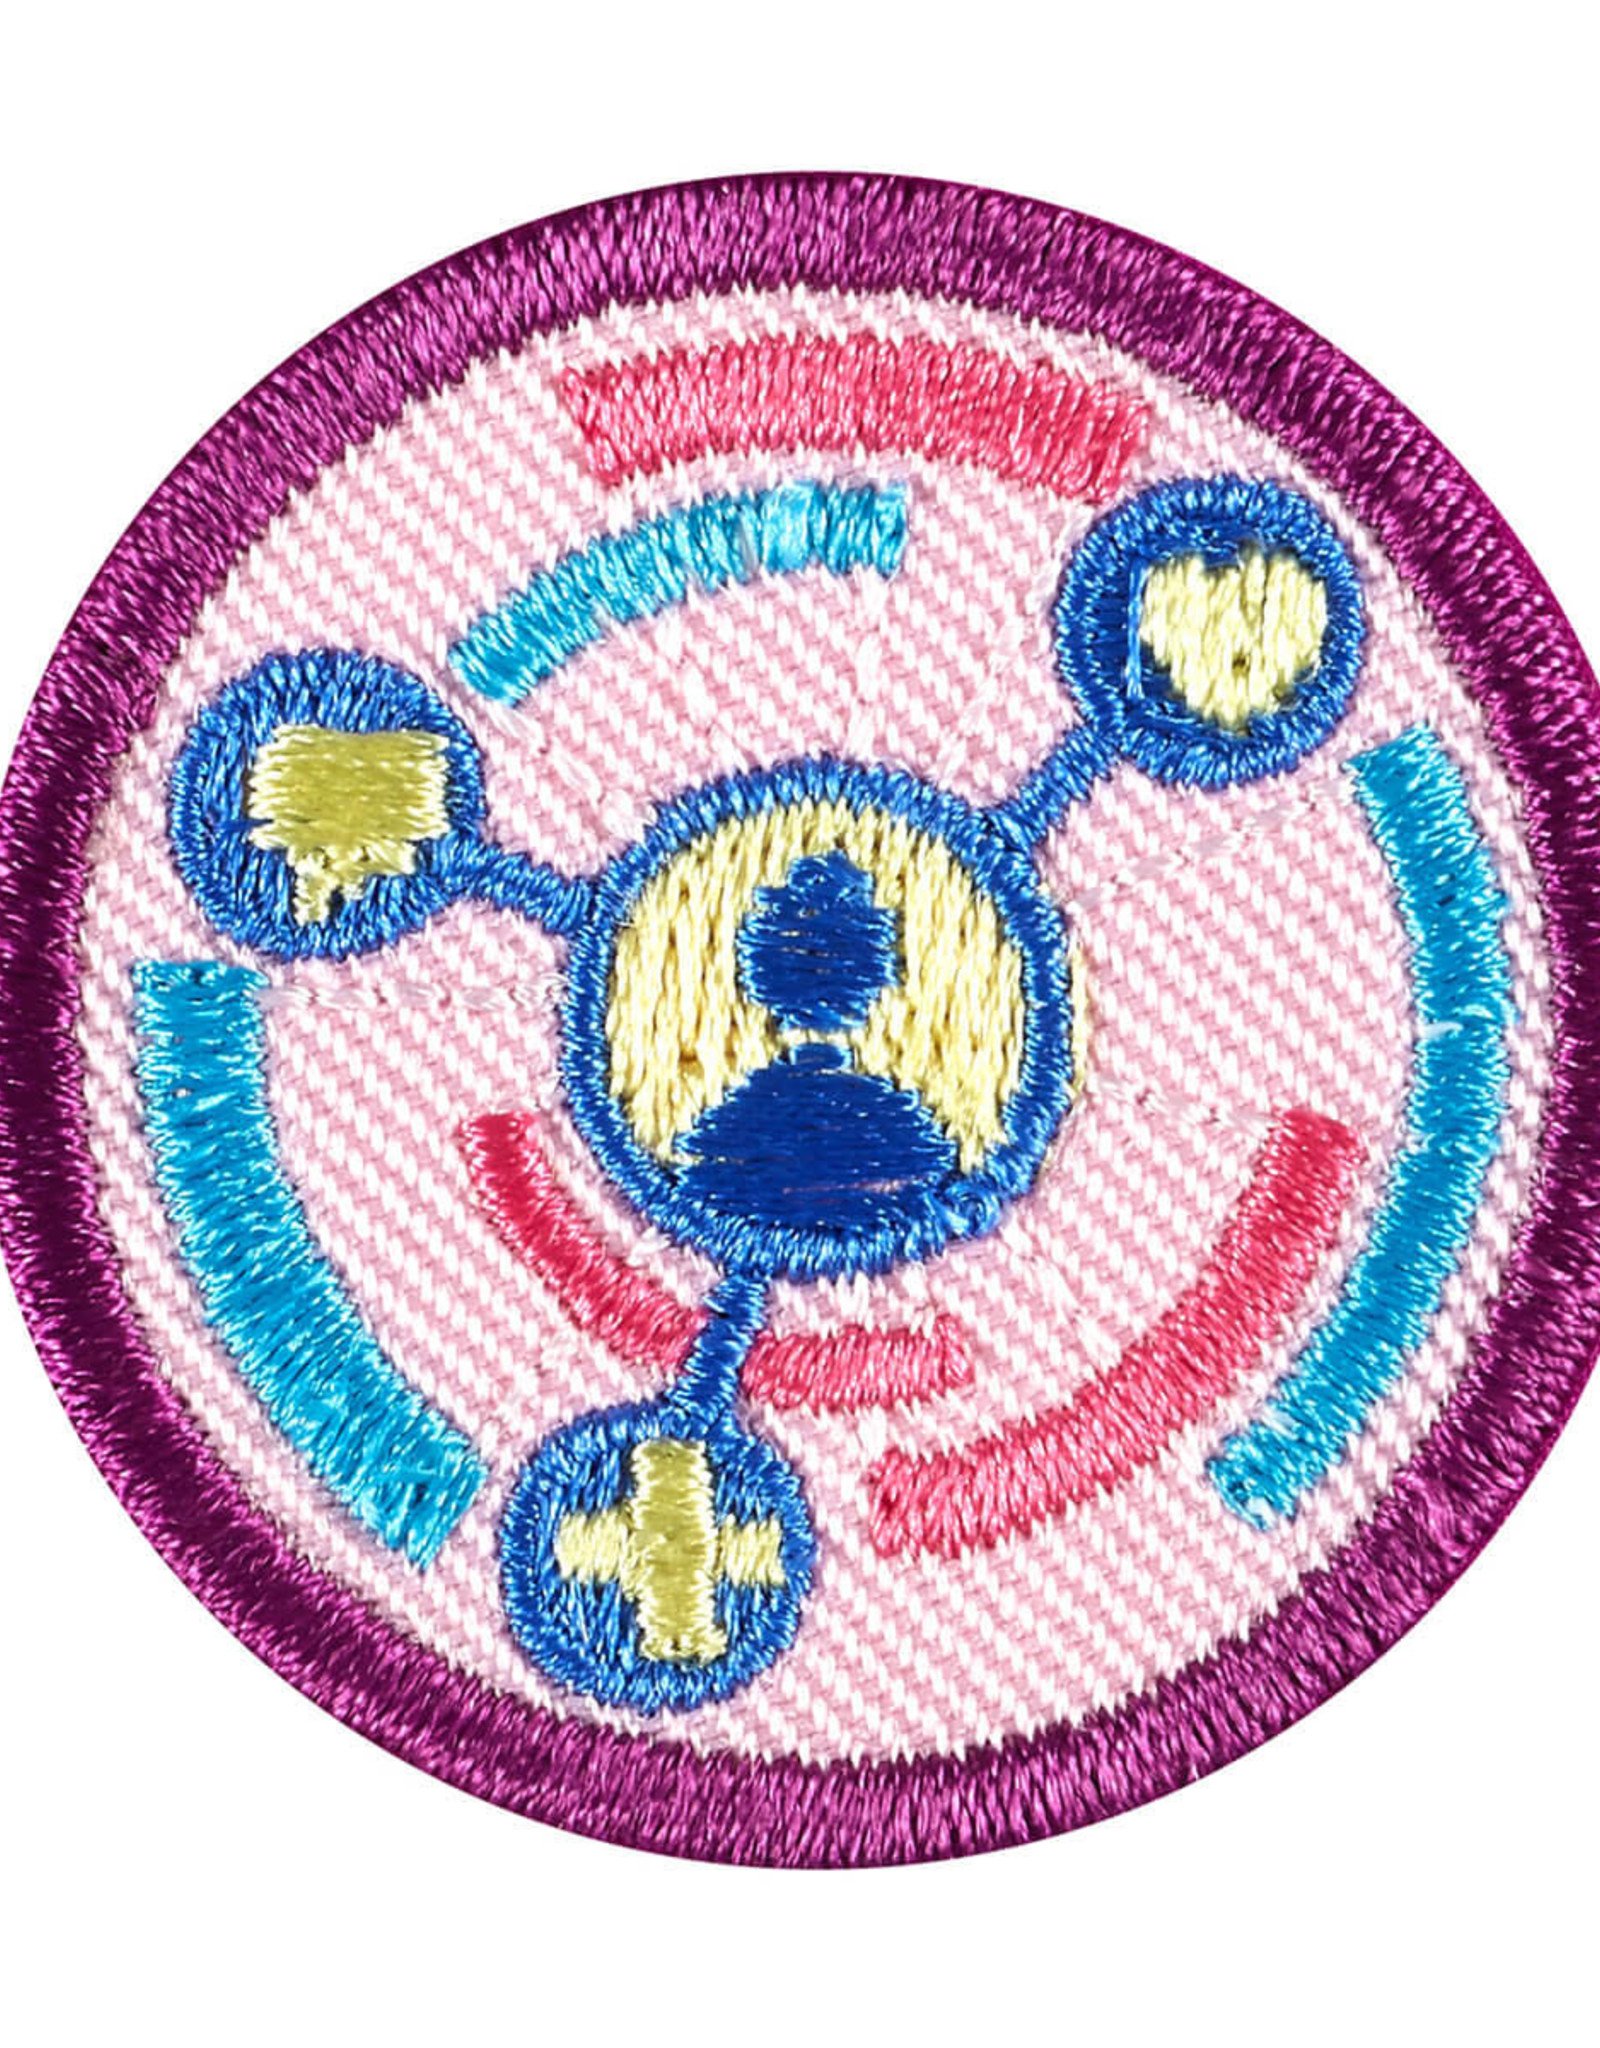 GIRL SCOUTS OF THE USA Junior Coding for Good 3: App Development Badge